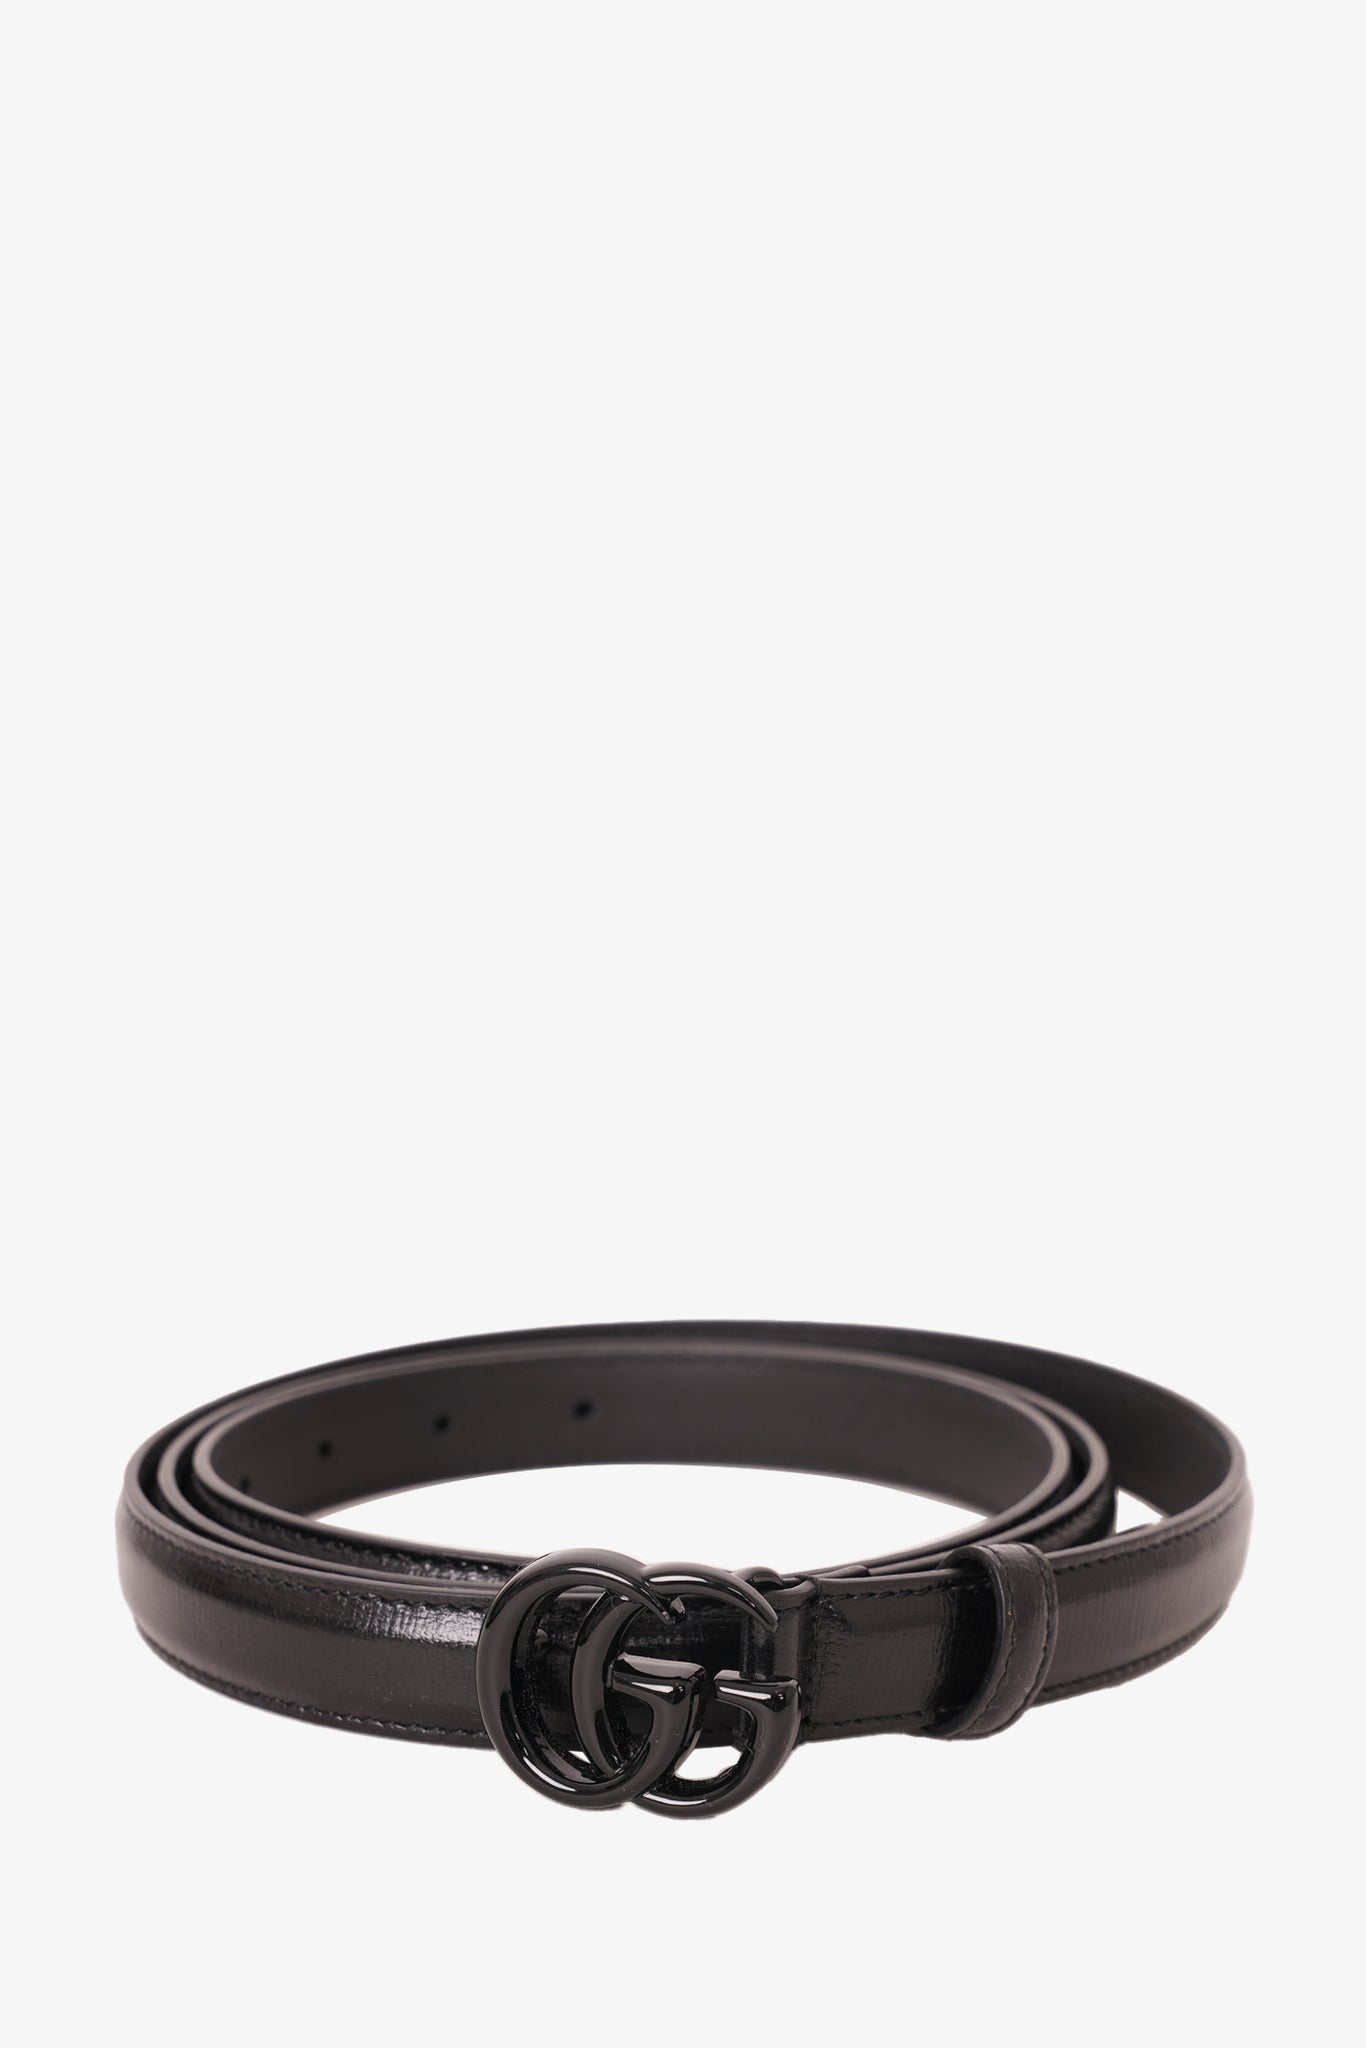 Gucci Black Leather 'GG' Marmont Belt